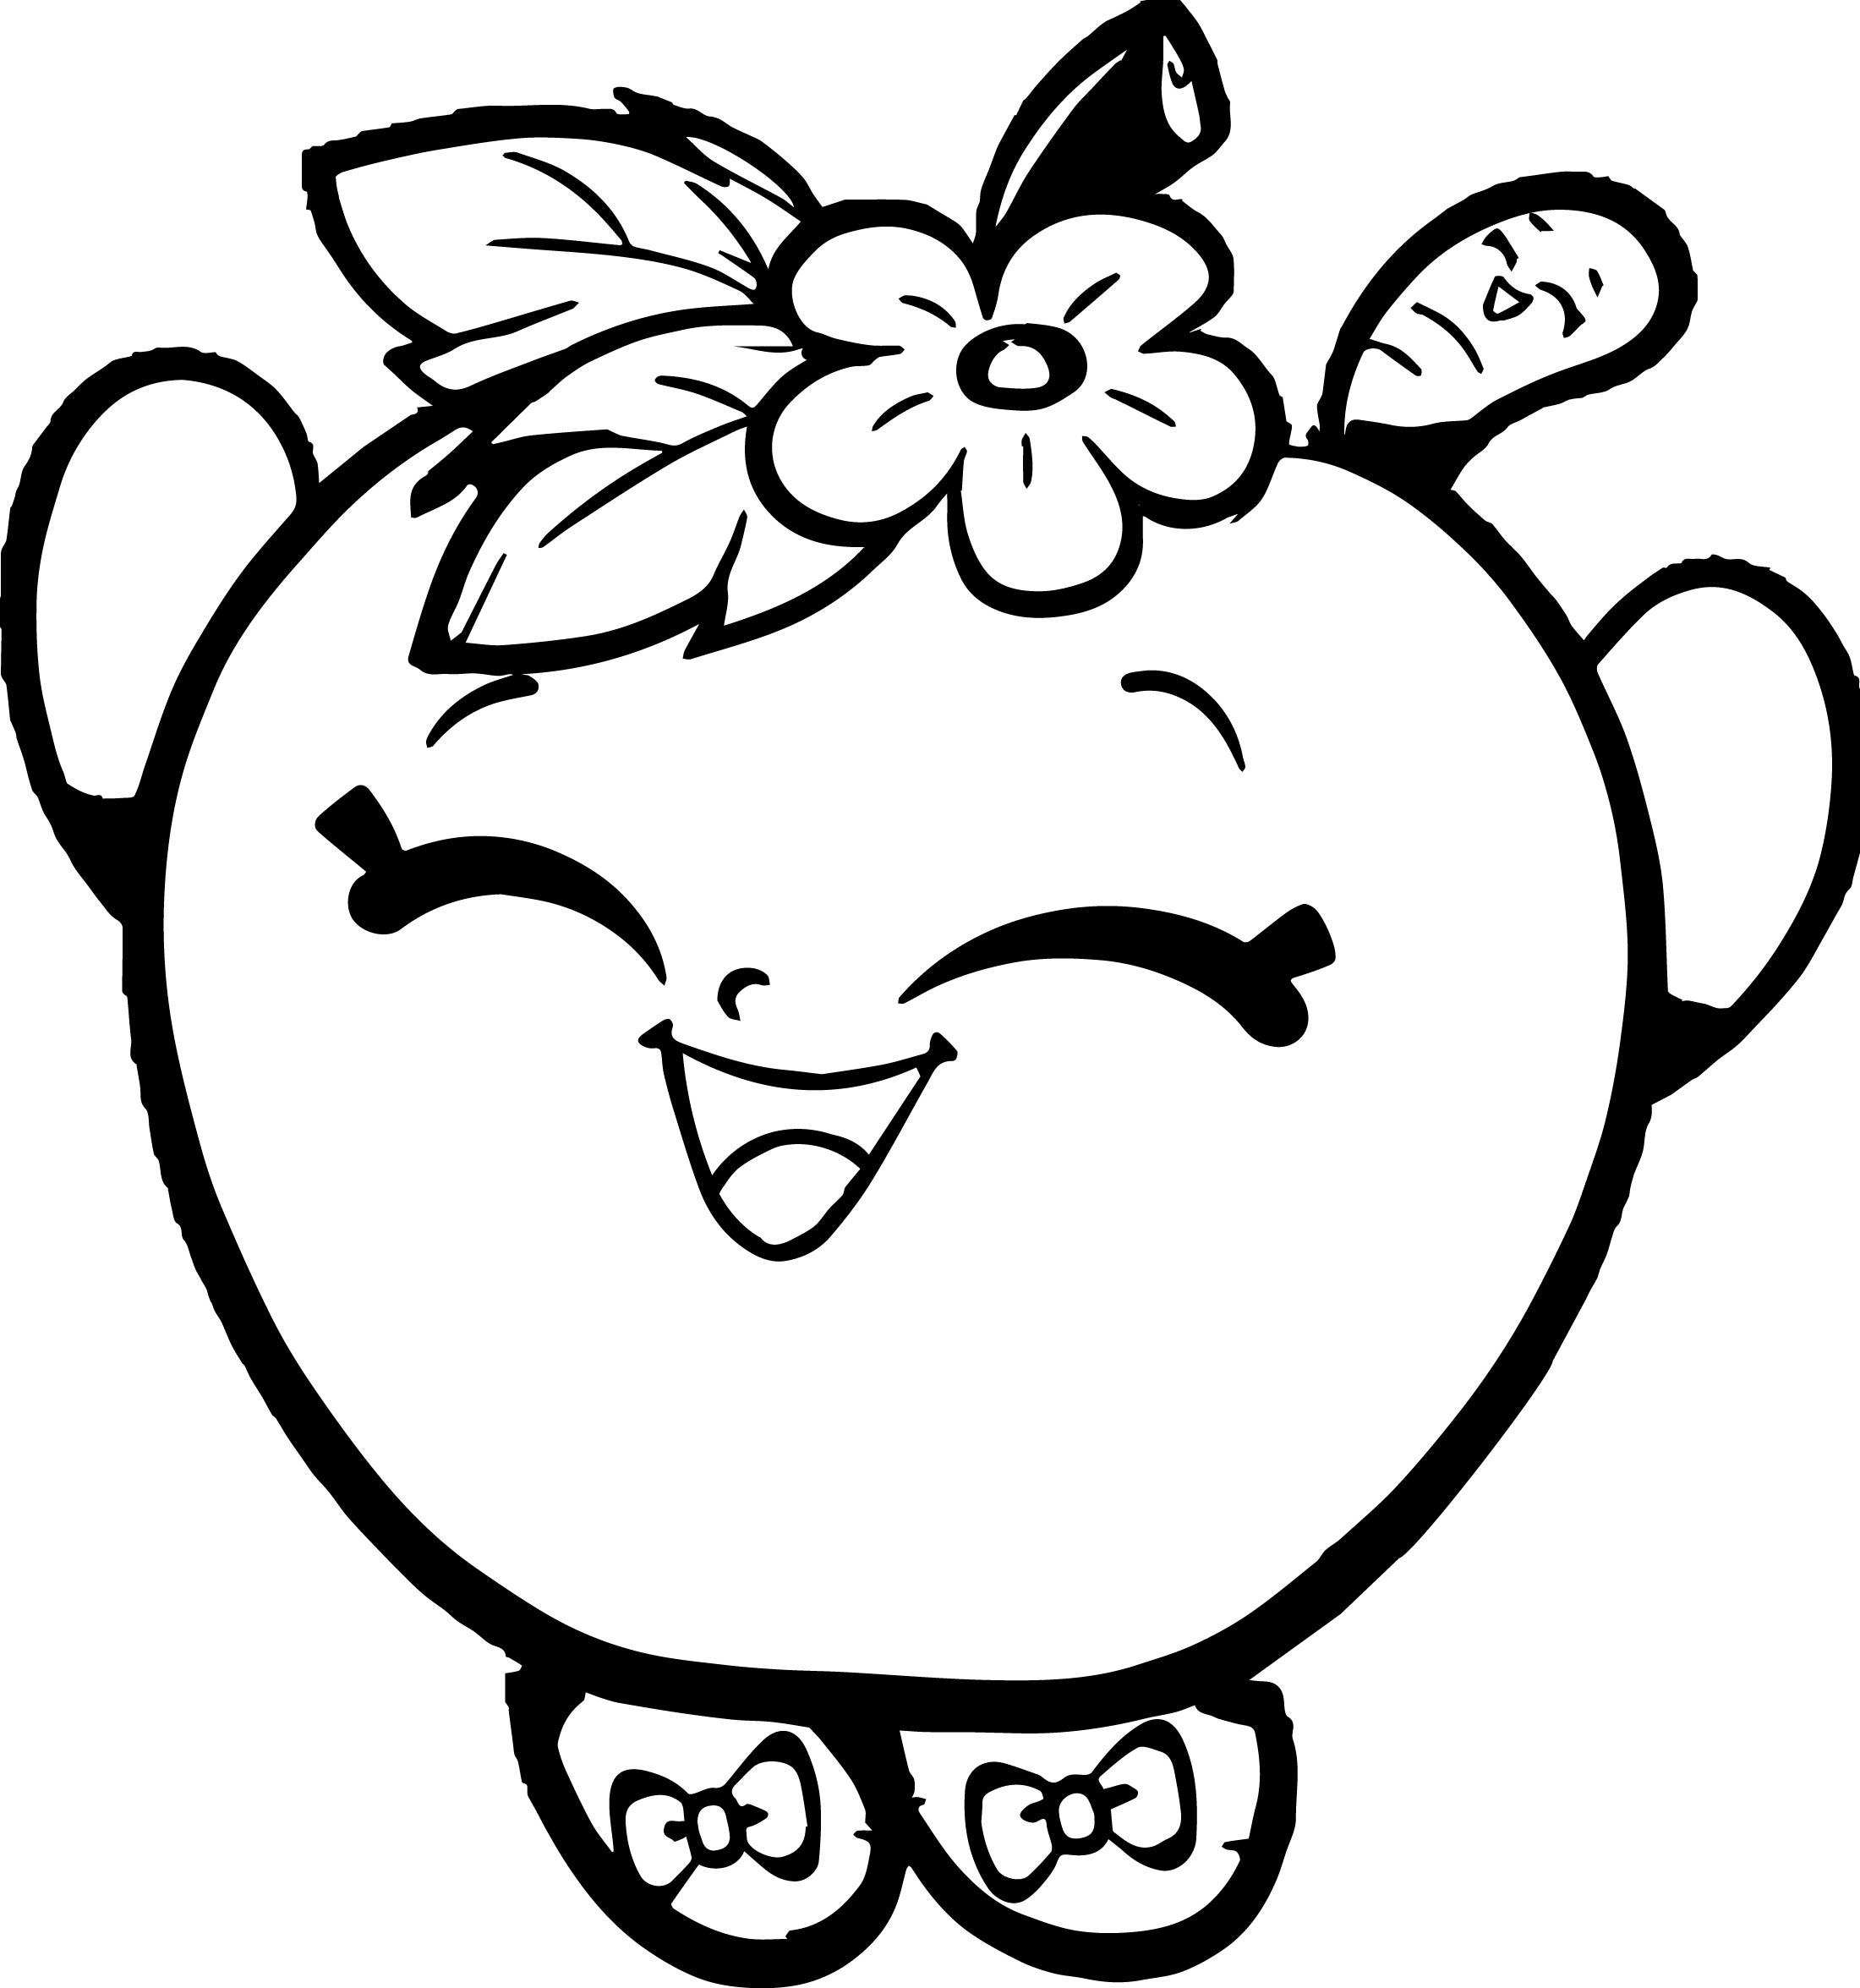 Apple Blossom Coloring Page at GetDrawings   Free download